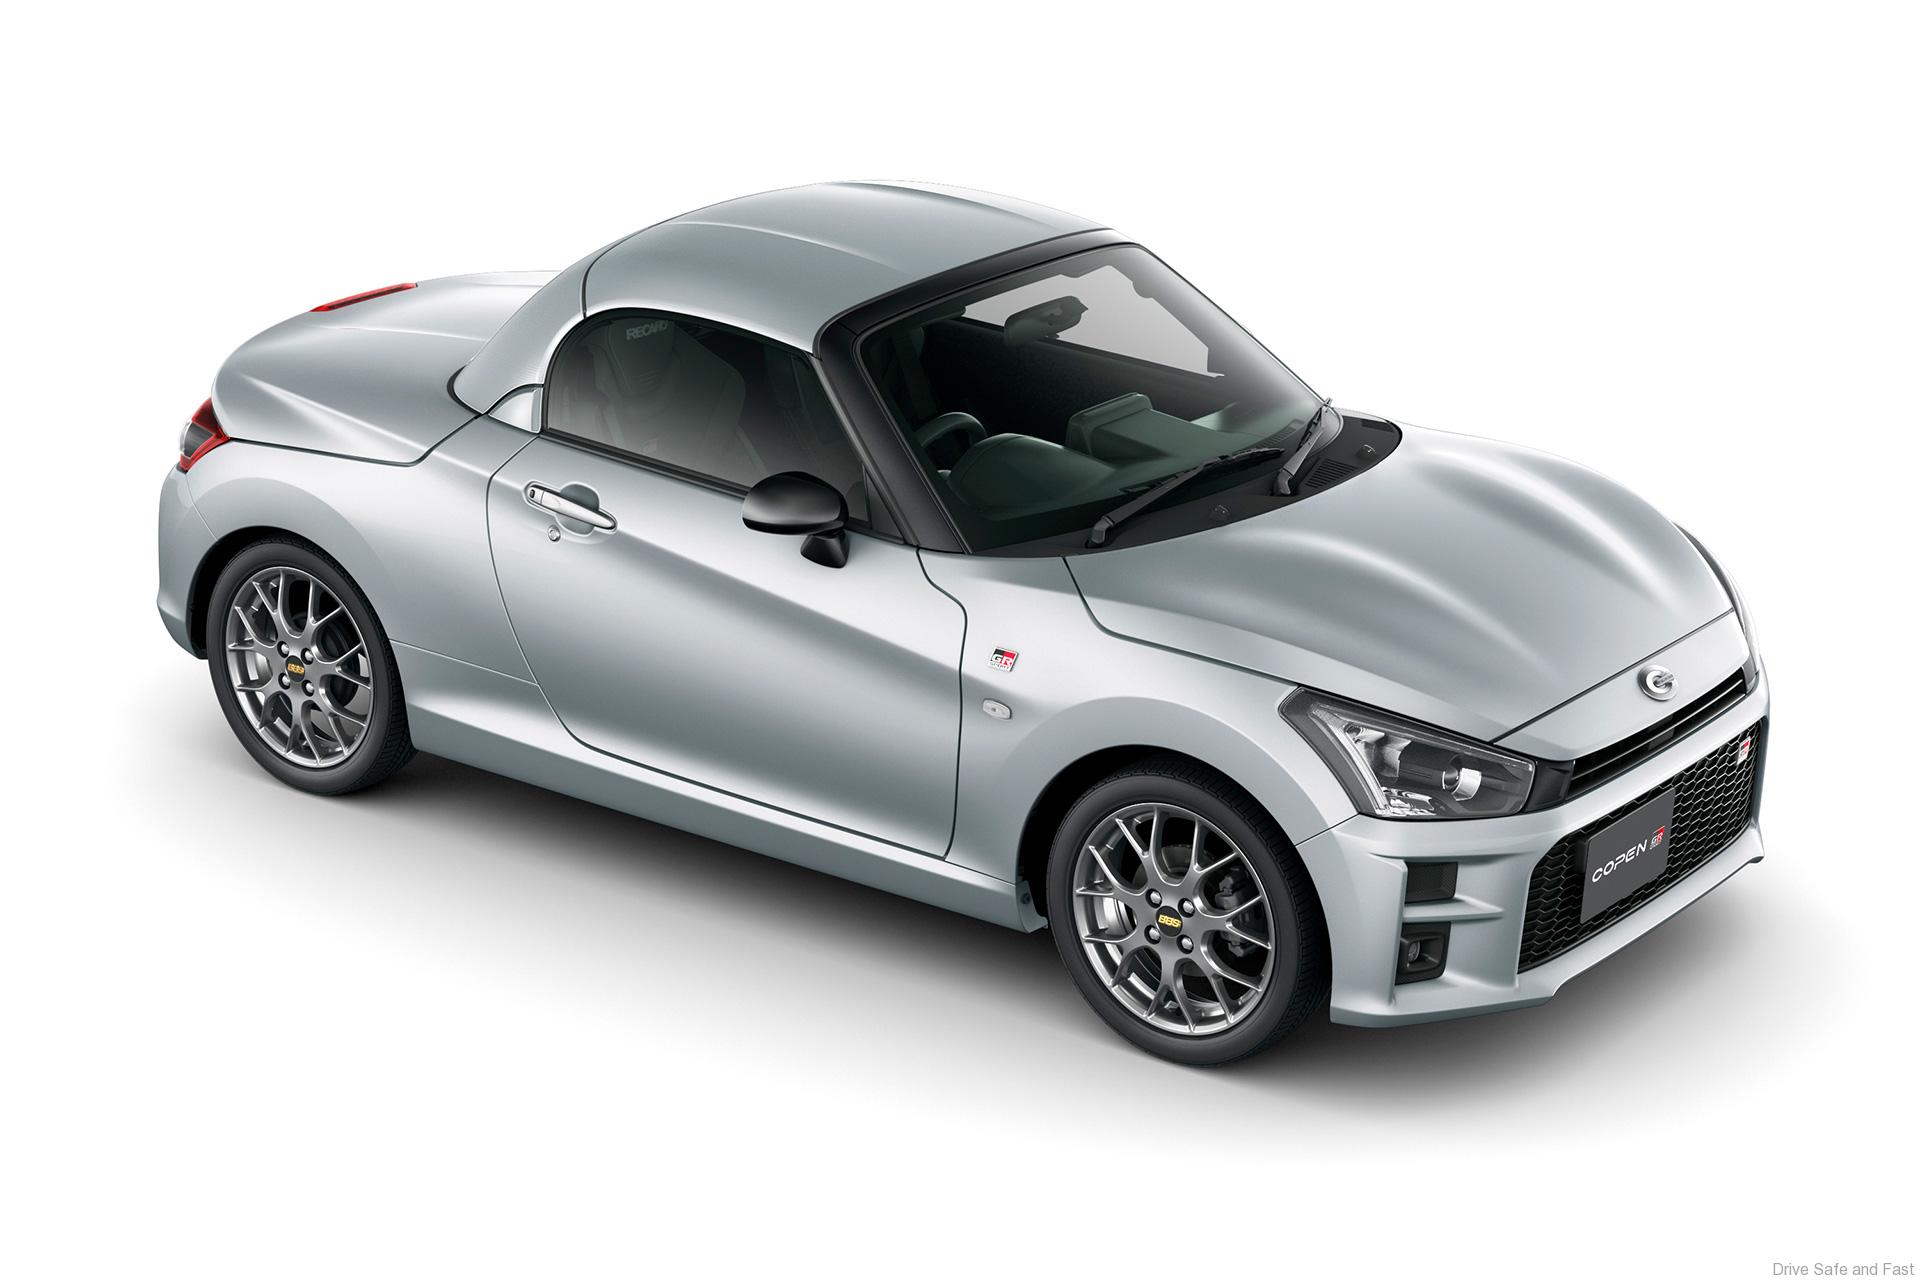 Toyota Dealerships in Japan Now Sell the Copen GR SPORT